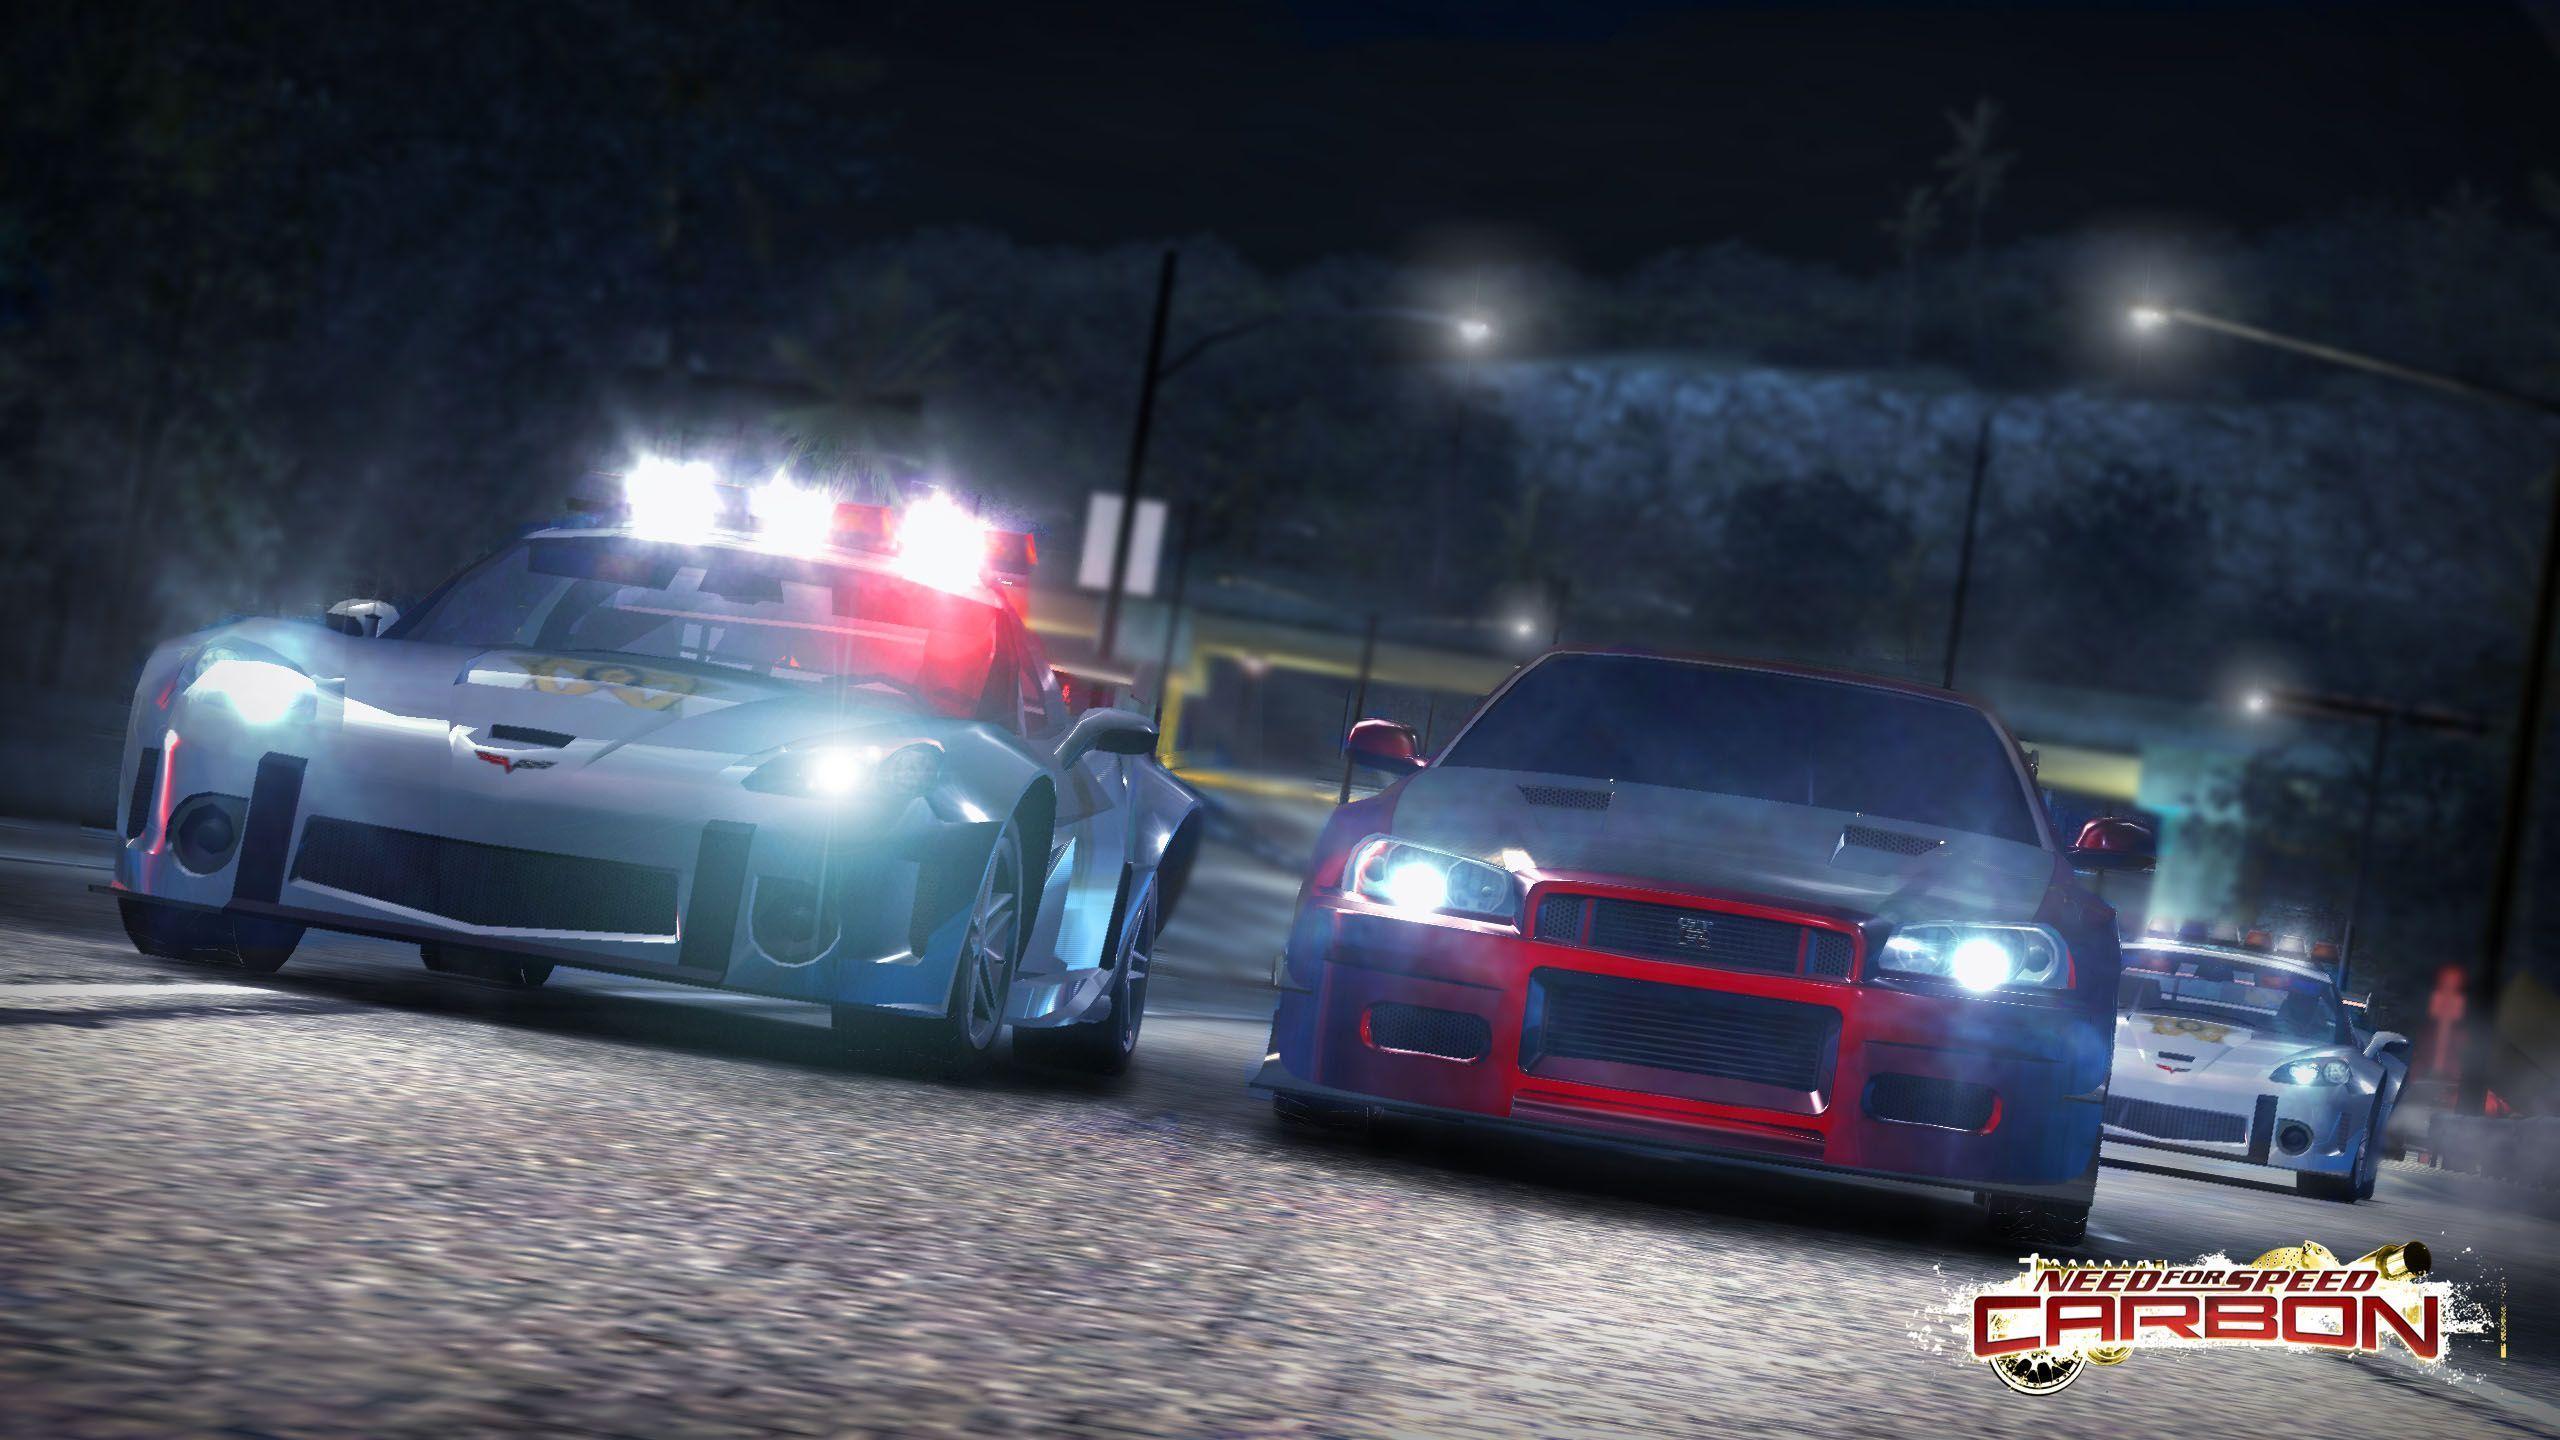 Need for Speed Carbon Wallpaper Cars Saga 640x512PX Wallpaper